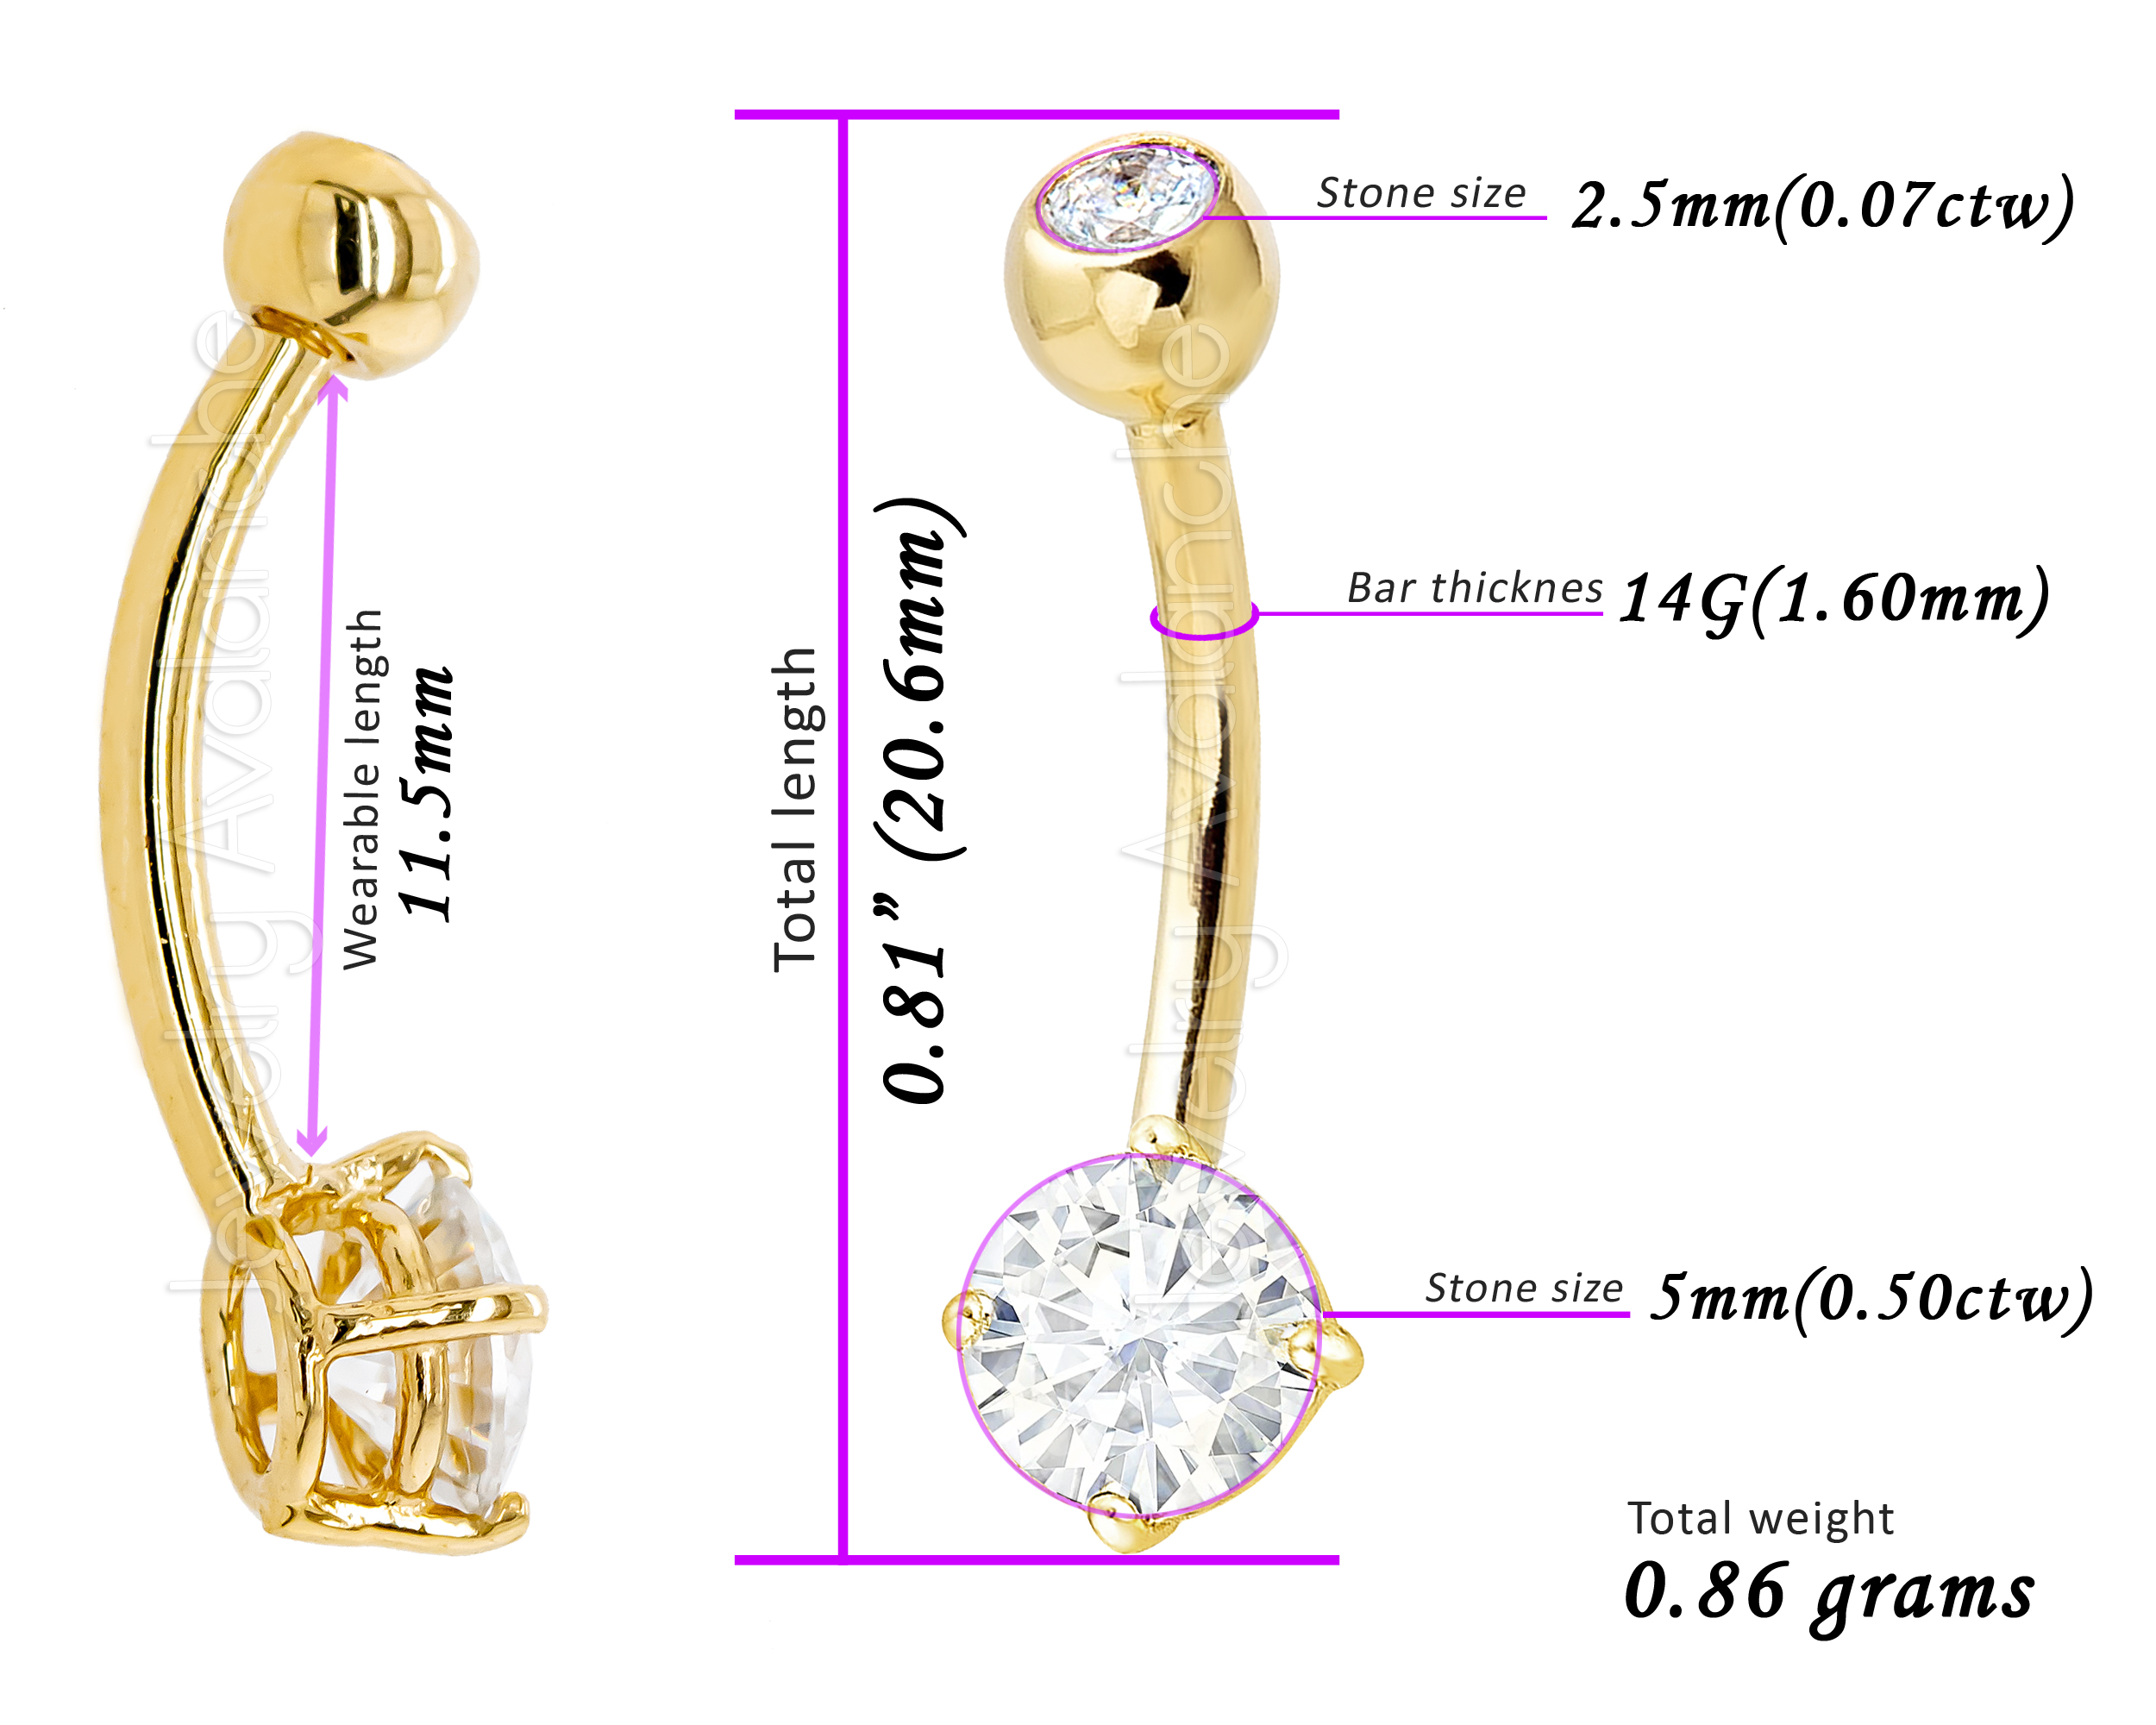 14G ROSE GOLD DOUBLE CZ GEM TITANIUM STEEL BELLY BUTTON RING NAVAL BODY  JEWELRY | eBay